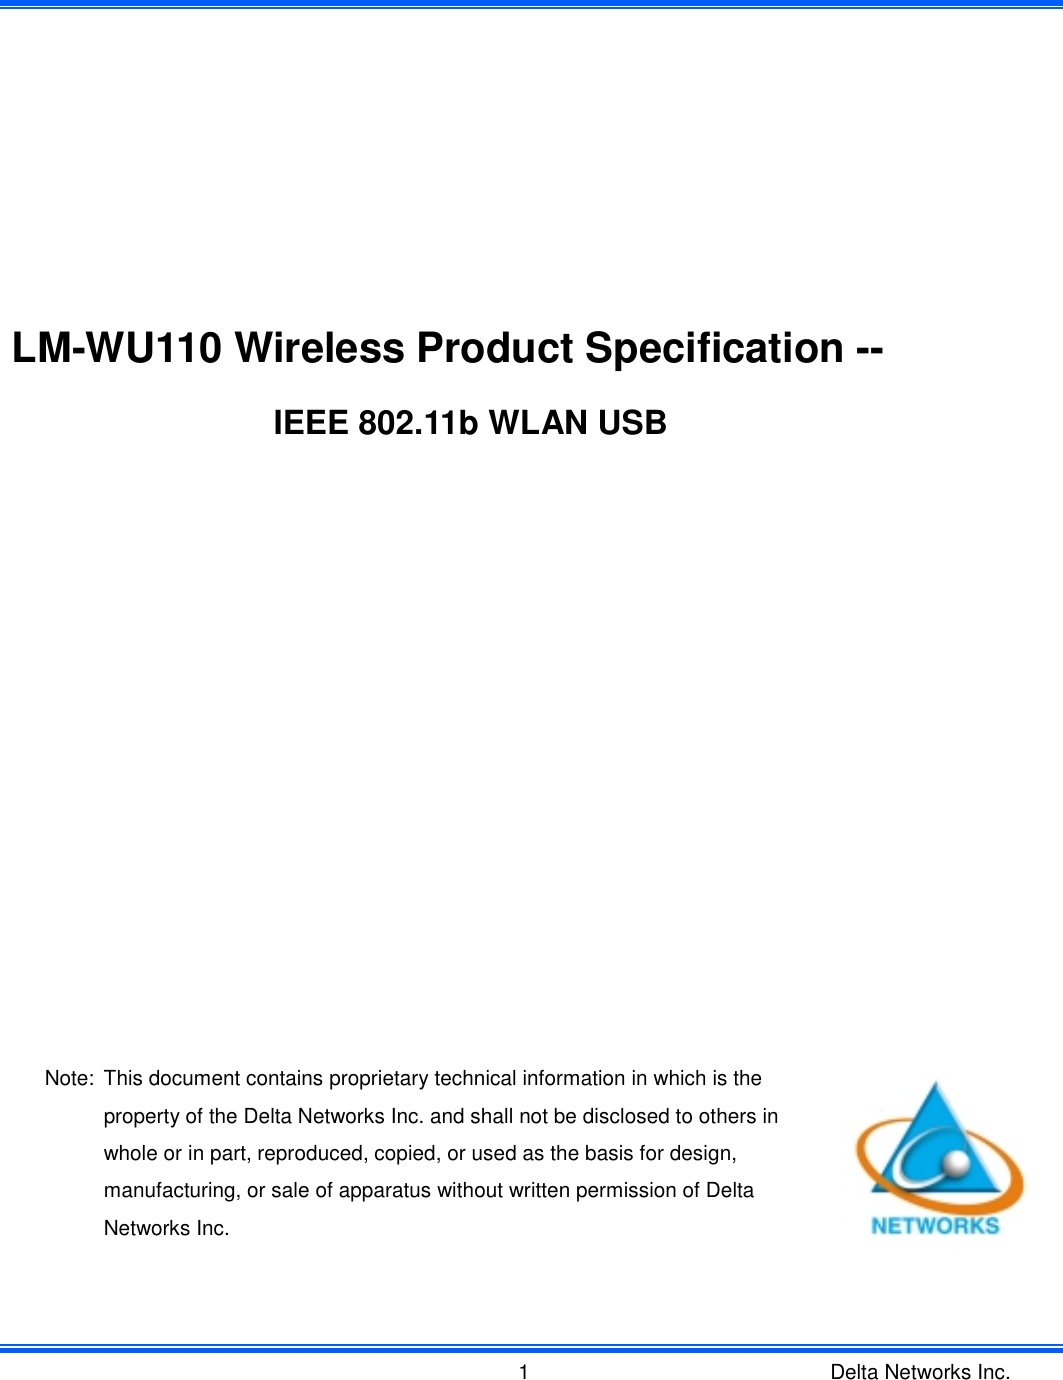 Delta Networks Inc.1 LM-WU110 Wireless Product Specification --IEEE 802.11b WLAN USBNote: This document contains proprietary technical information in which is theproperty of the Delta Networks Inc. and shall not be disclosed to others inwhole or in part, reproduced, copied, or used as the basis for design,manufacturing, or sale of apparatus without written permission of DeltaNetworks Inc.